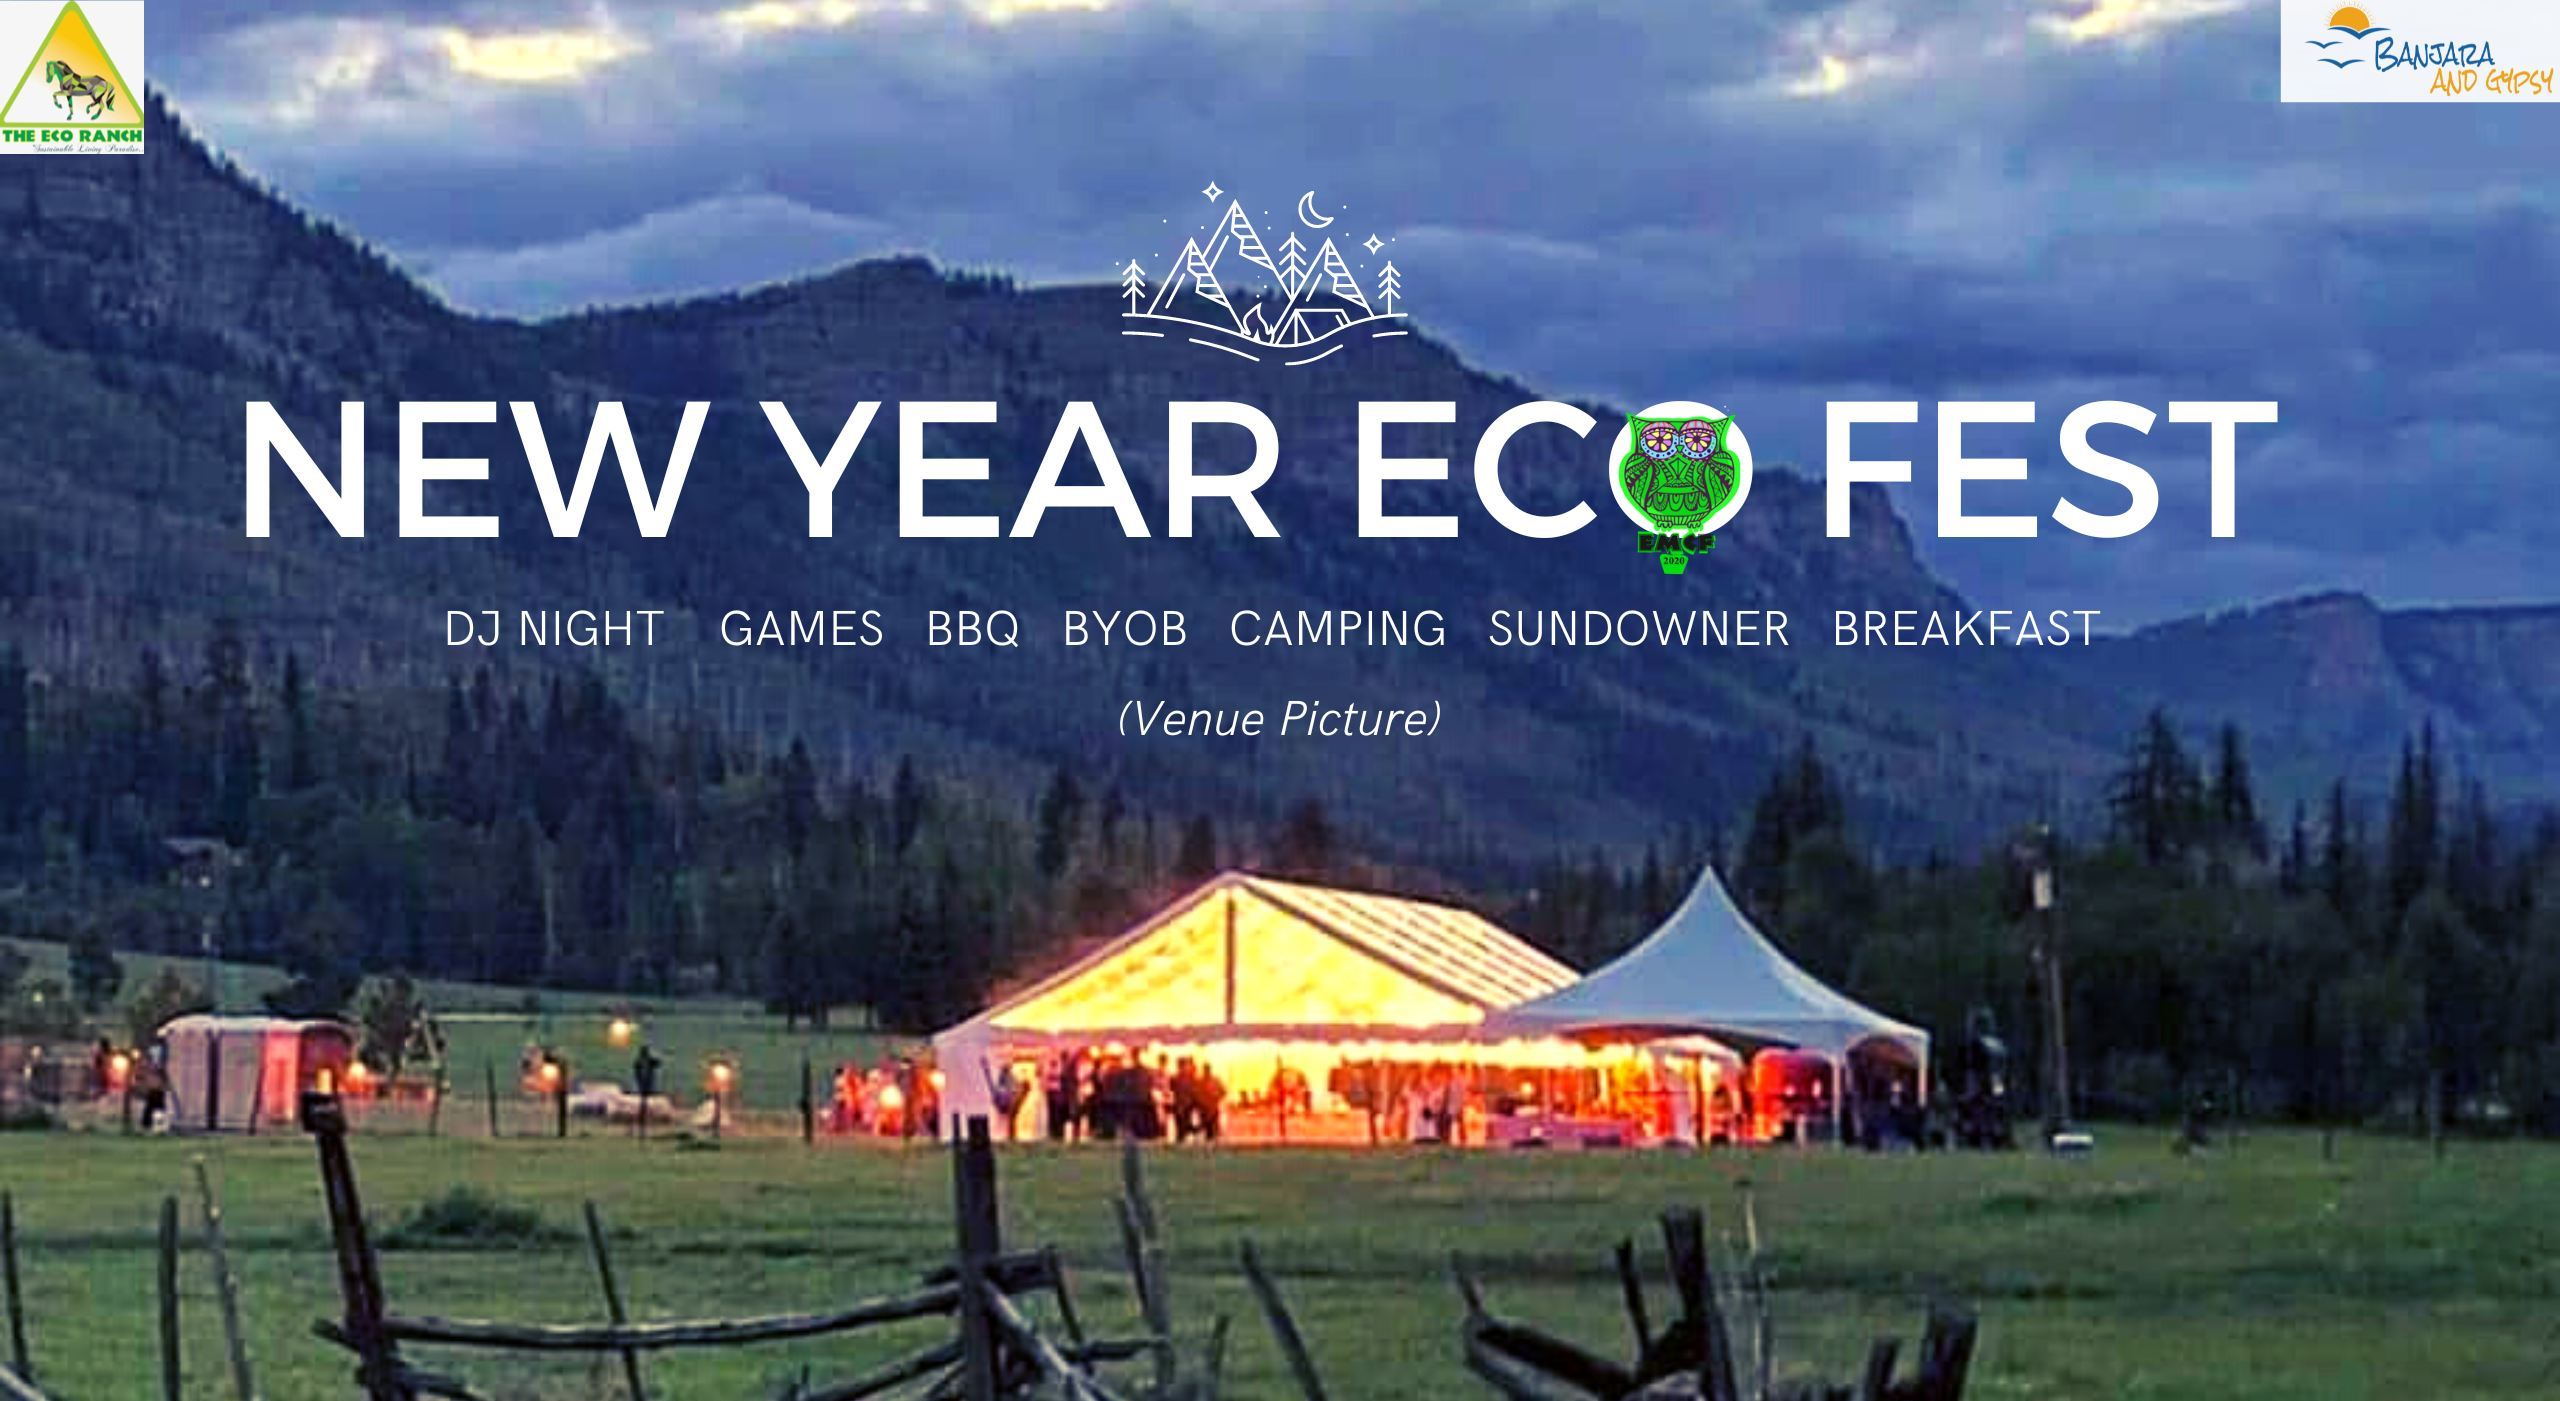 New Year Eco Fest